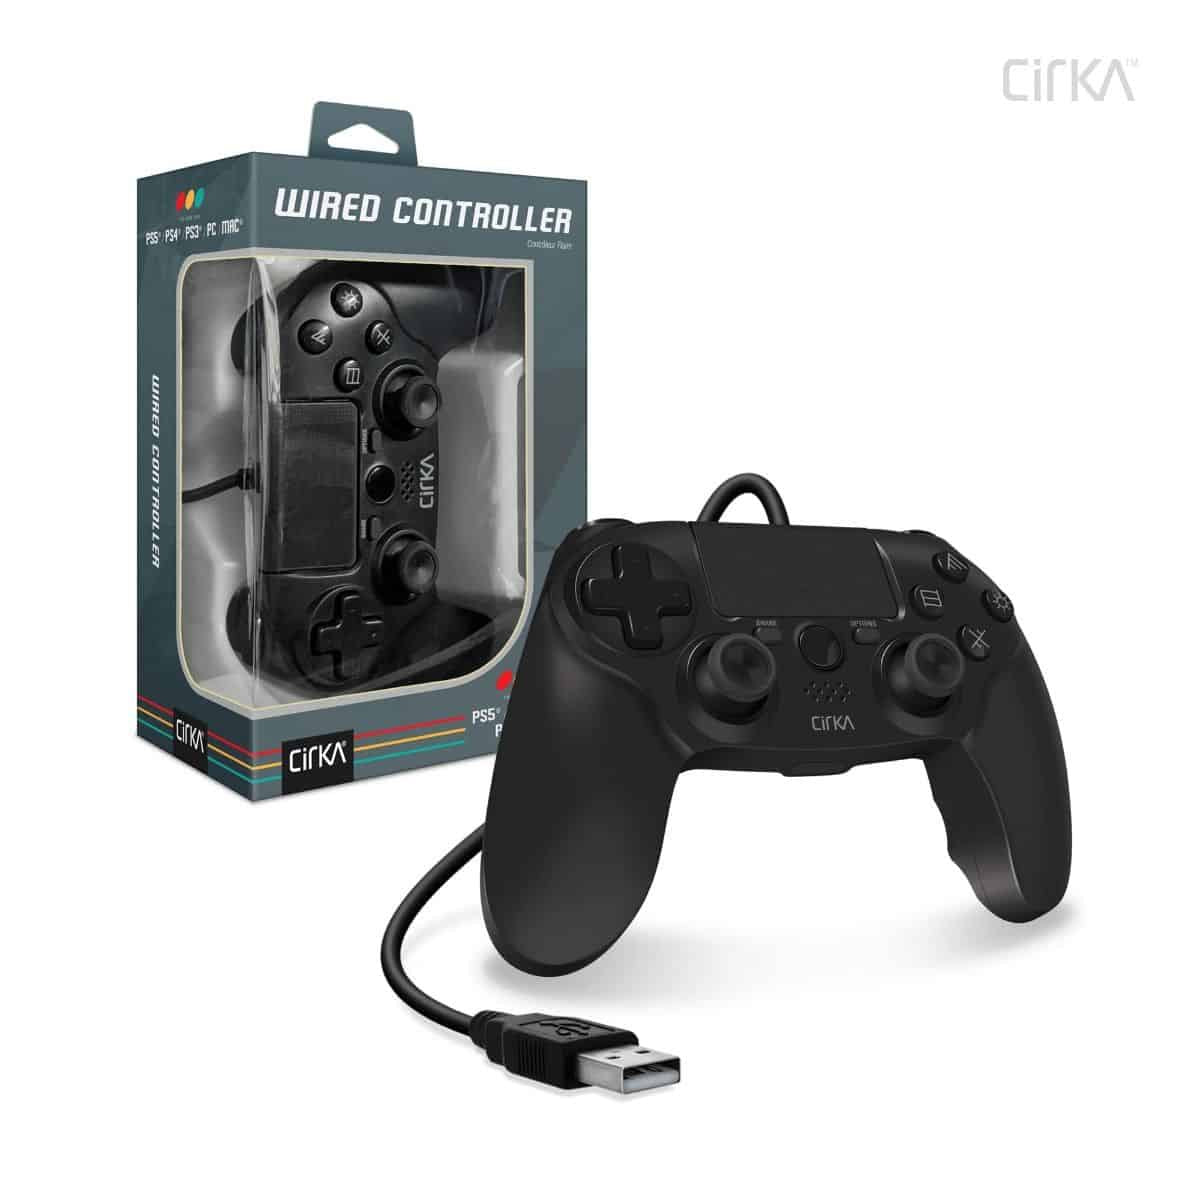 Wired Game Controller for PS4/PC/MAC (Black) - Cirka